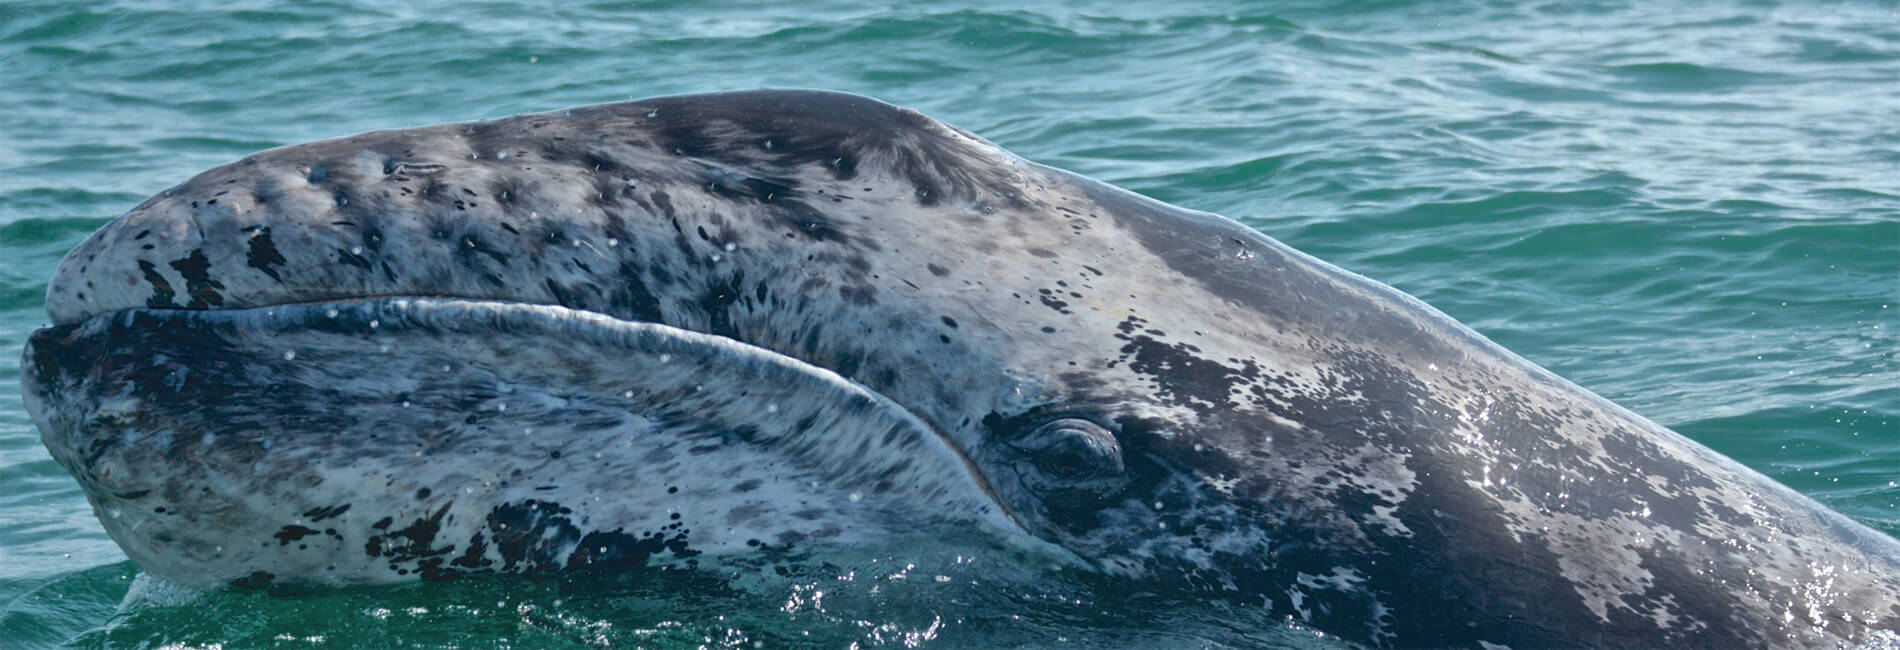 gray whale watching guide